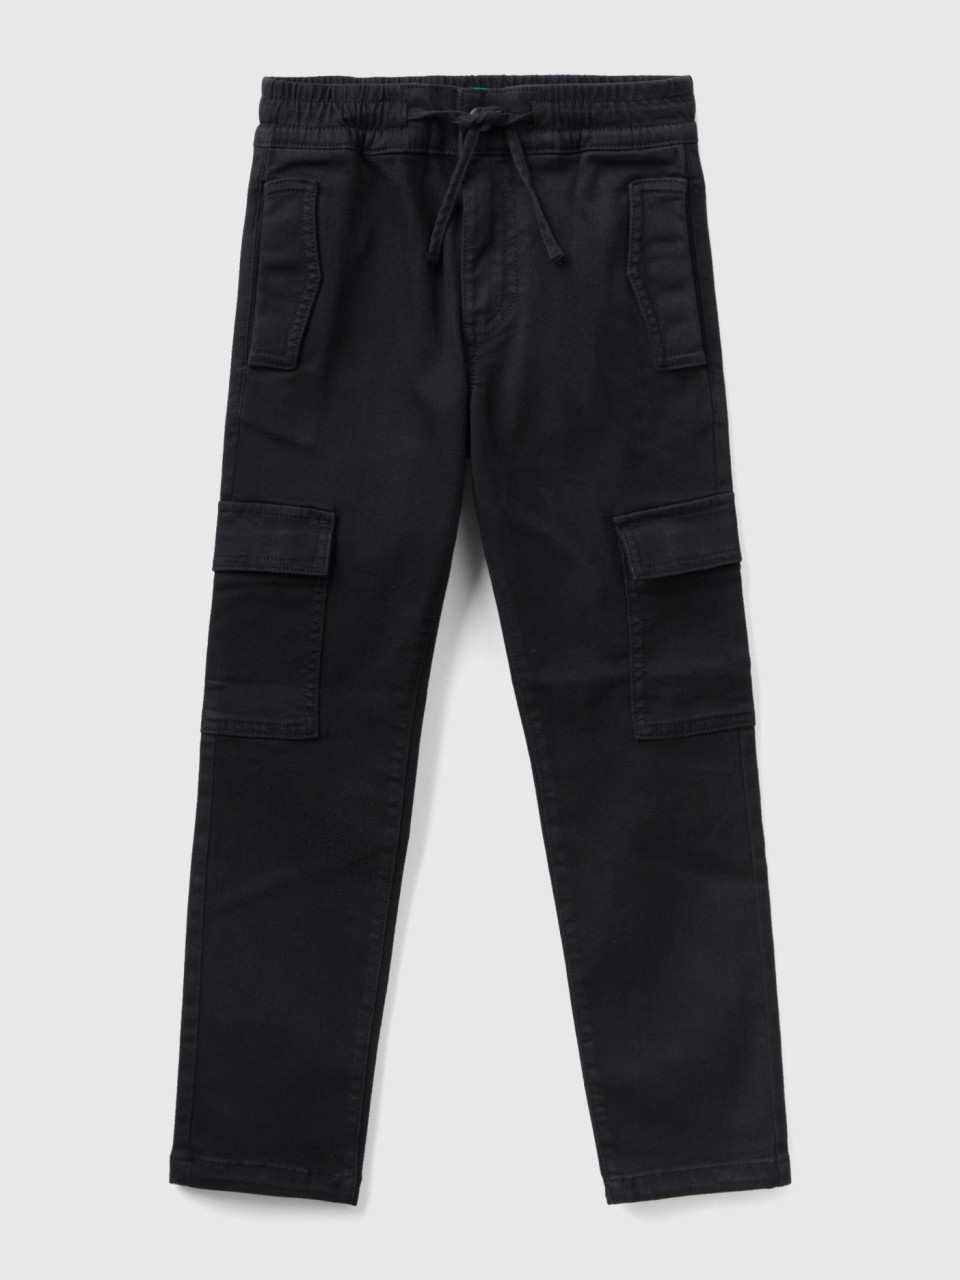 Benetton, Cargo Trousers With Drawstring, Black, Kids